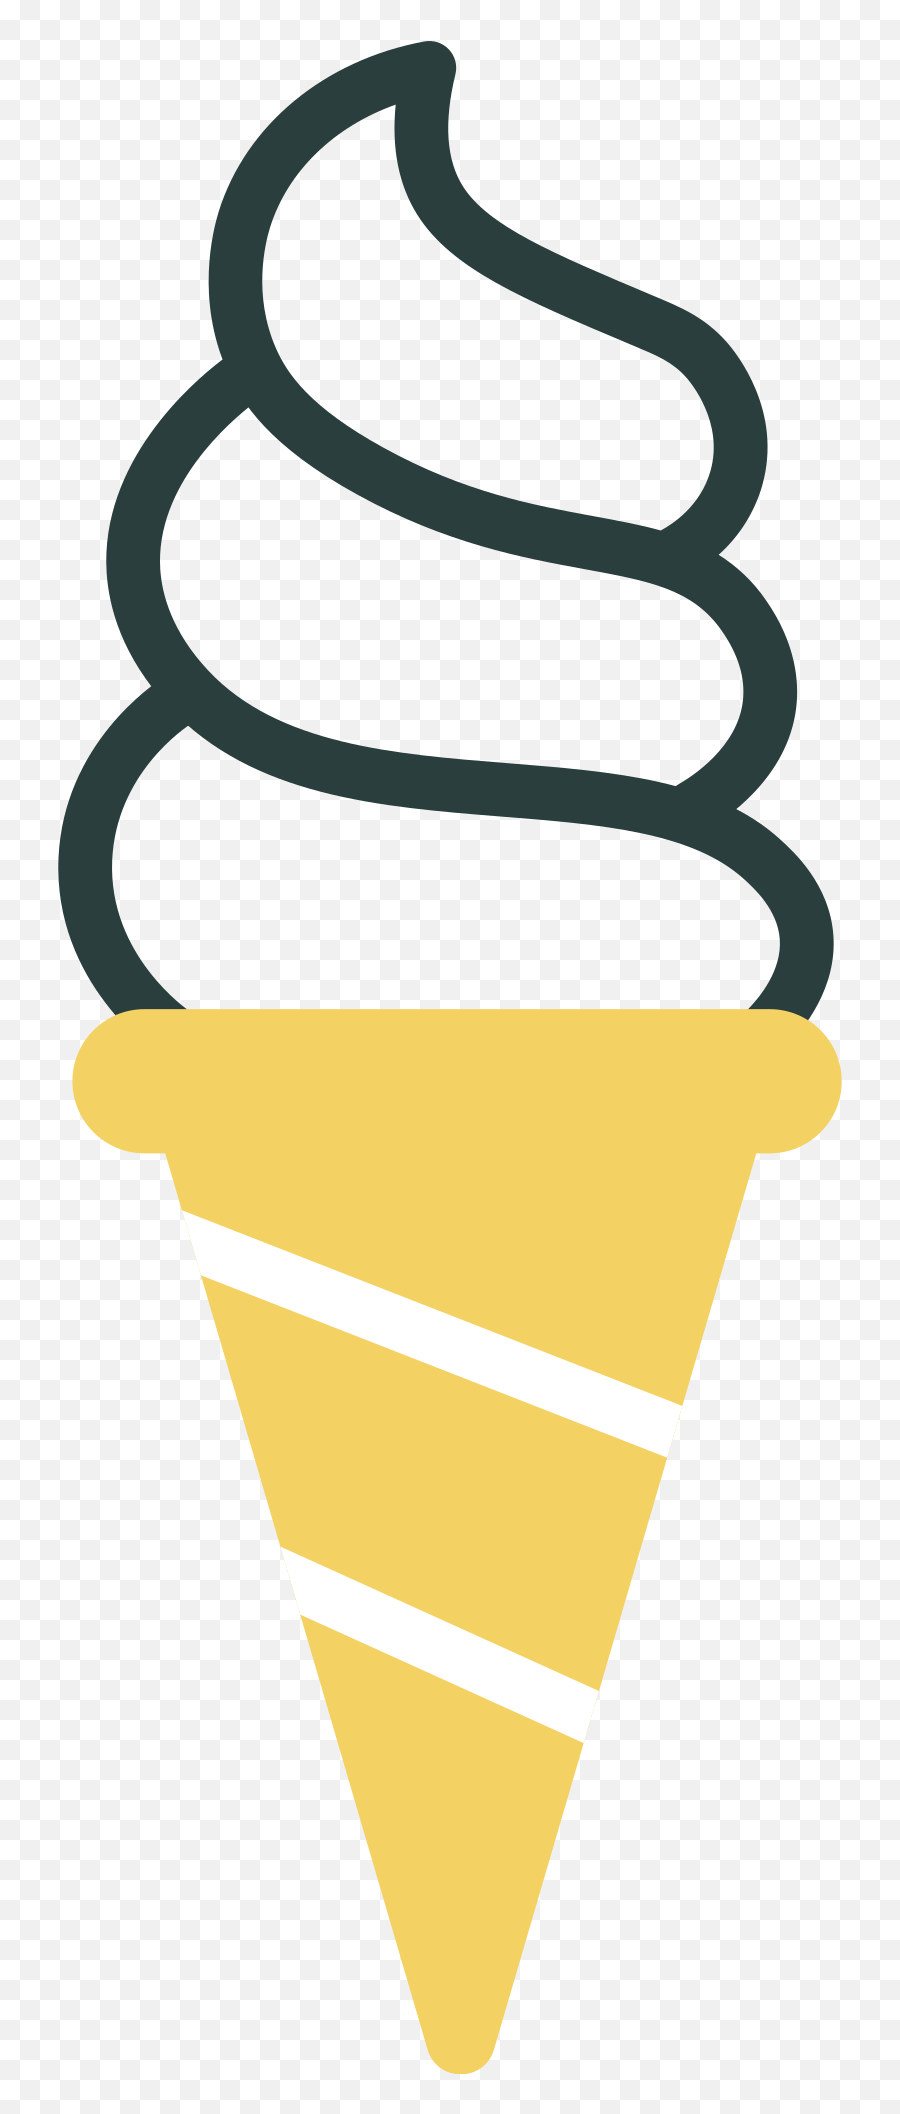 Style Ice Cream Cone Vector Images In Png And Svg Icons8 Emoji,Icecream Emoji For Kods